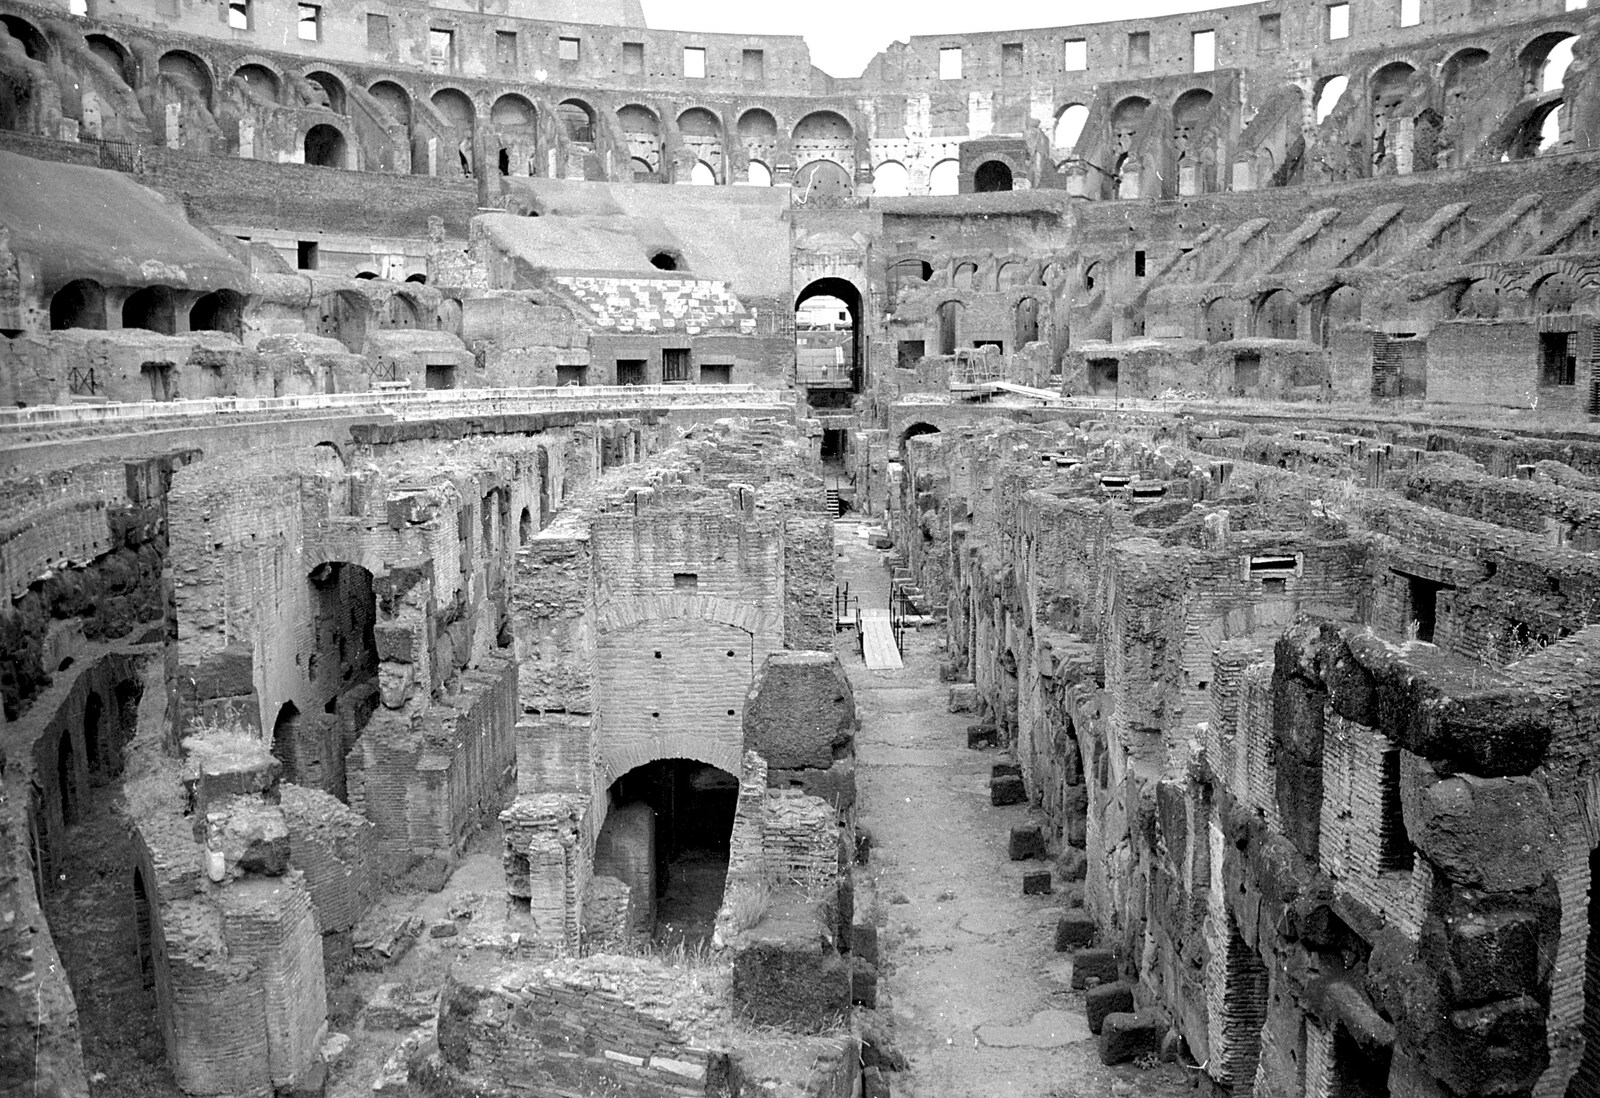 The complicated insides of the Colosseum from A Working Trip to Rome, Italy - 10th September 1999